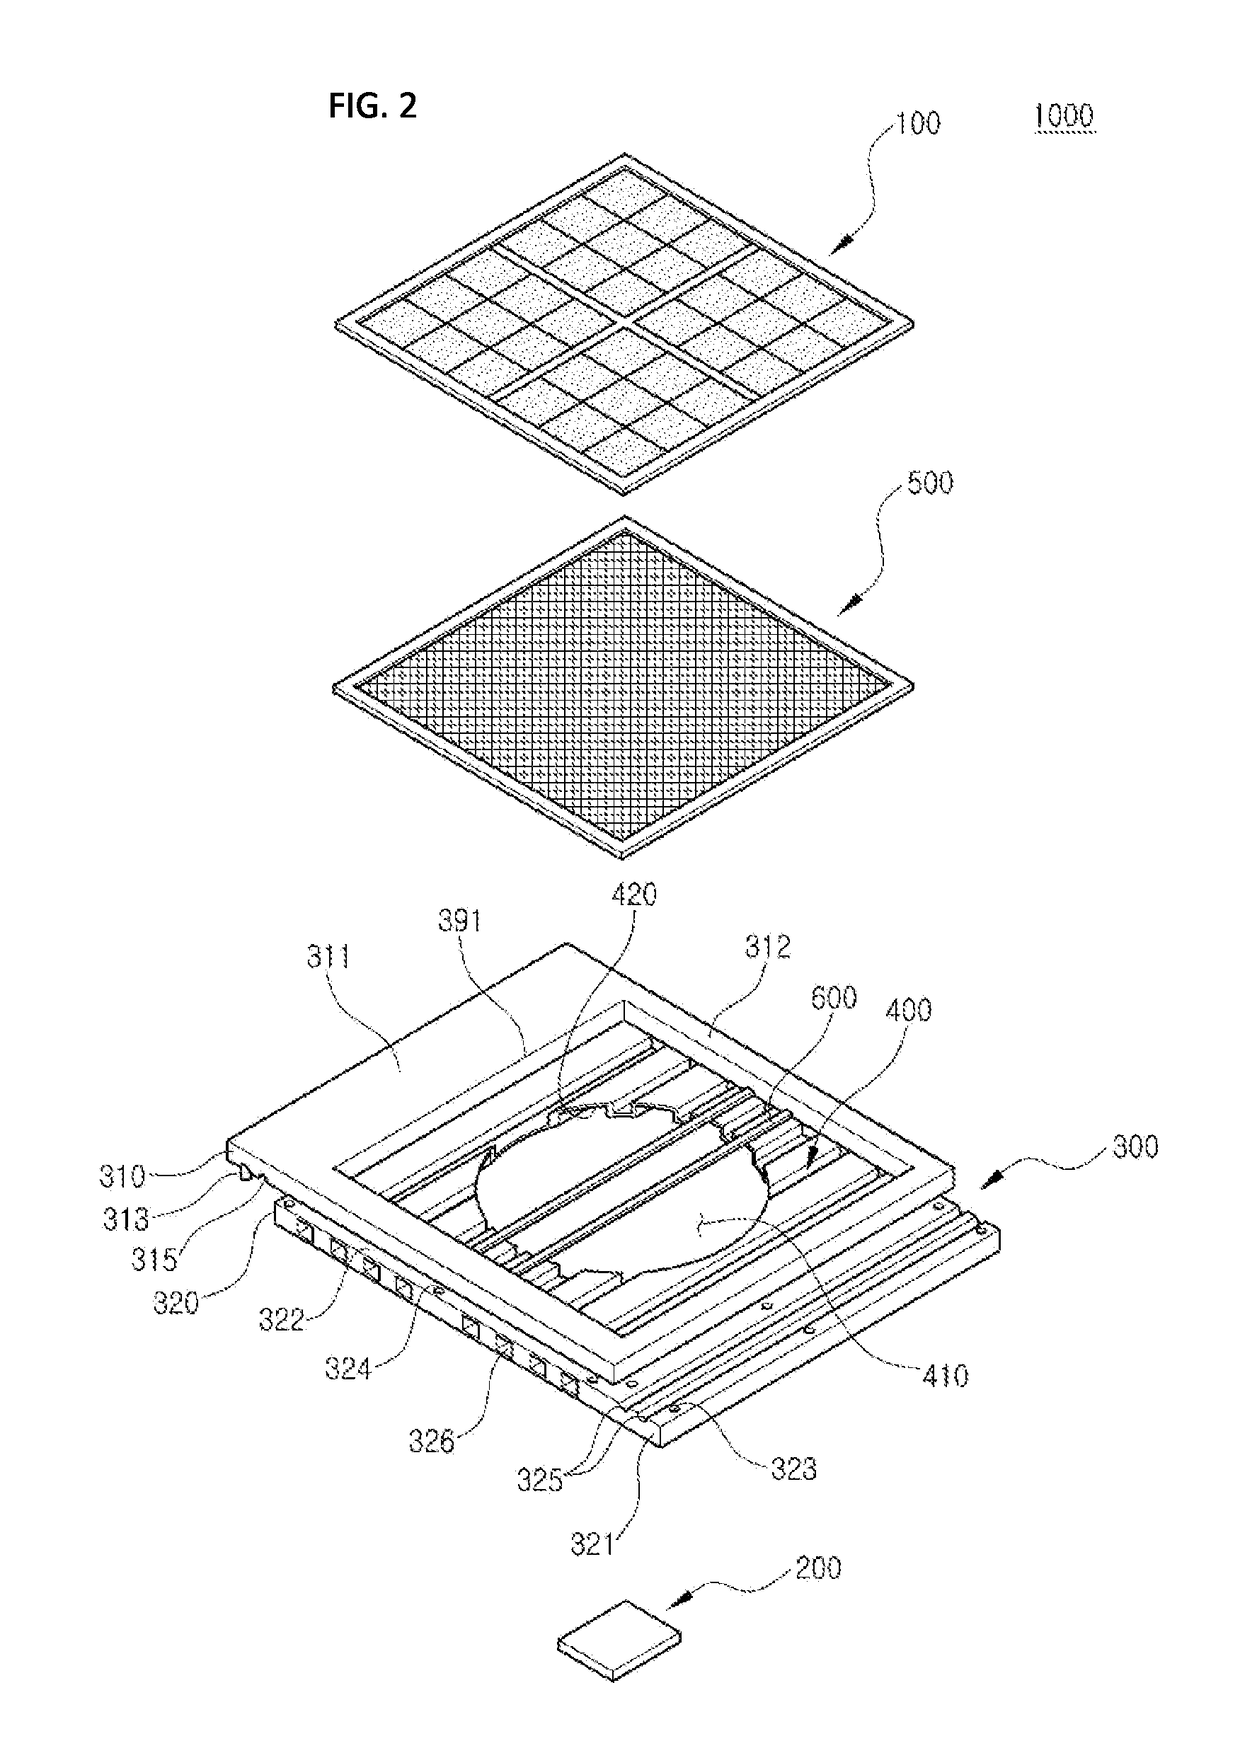 Roof integrated photovoltaic module with a device capable of improving and optimizing photovoltaic efficiency